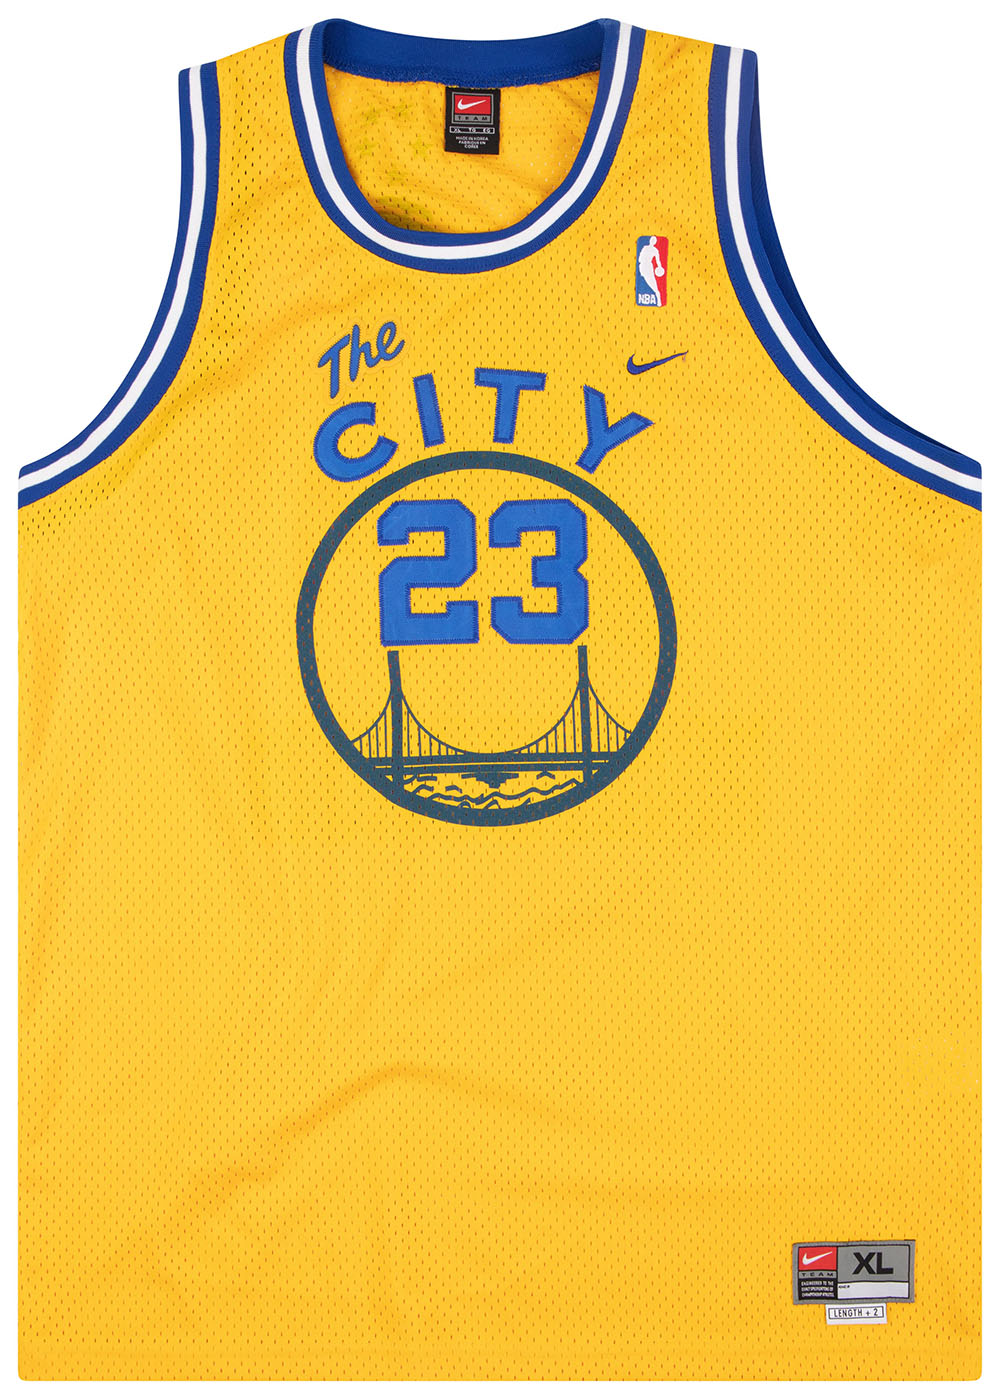 Brooklyn Nets #7 Kevin Durant 2022 23 White Classic Edition Stitched  Basketball Jersey